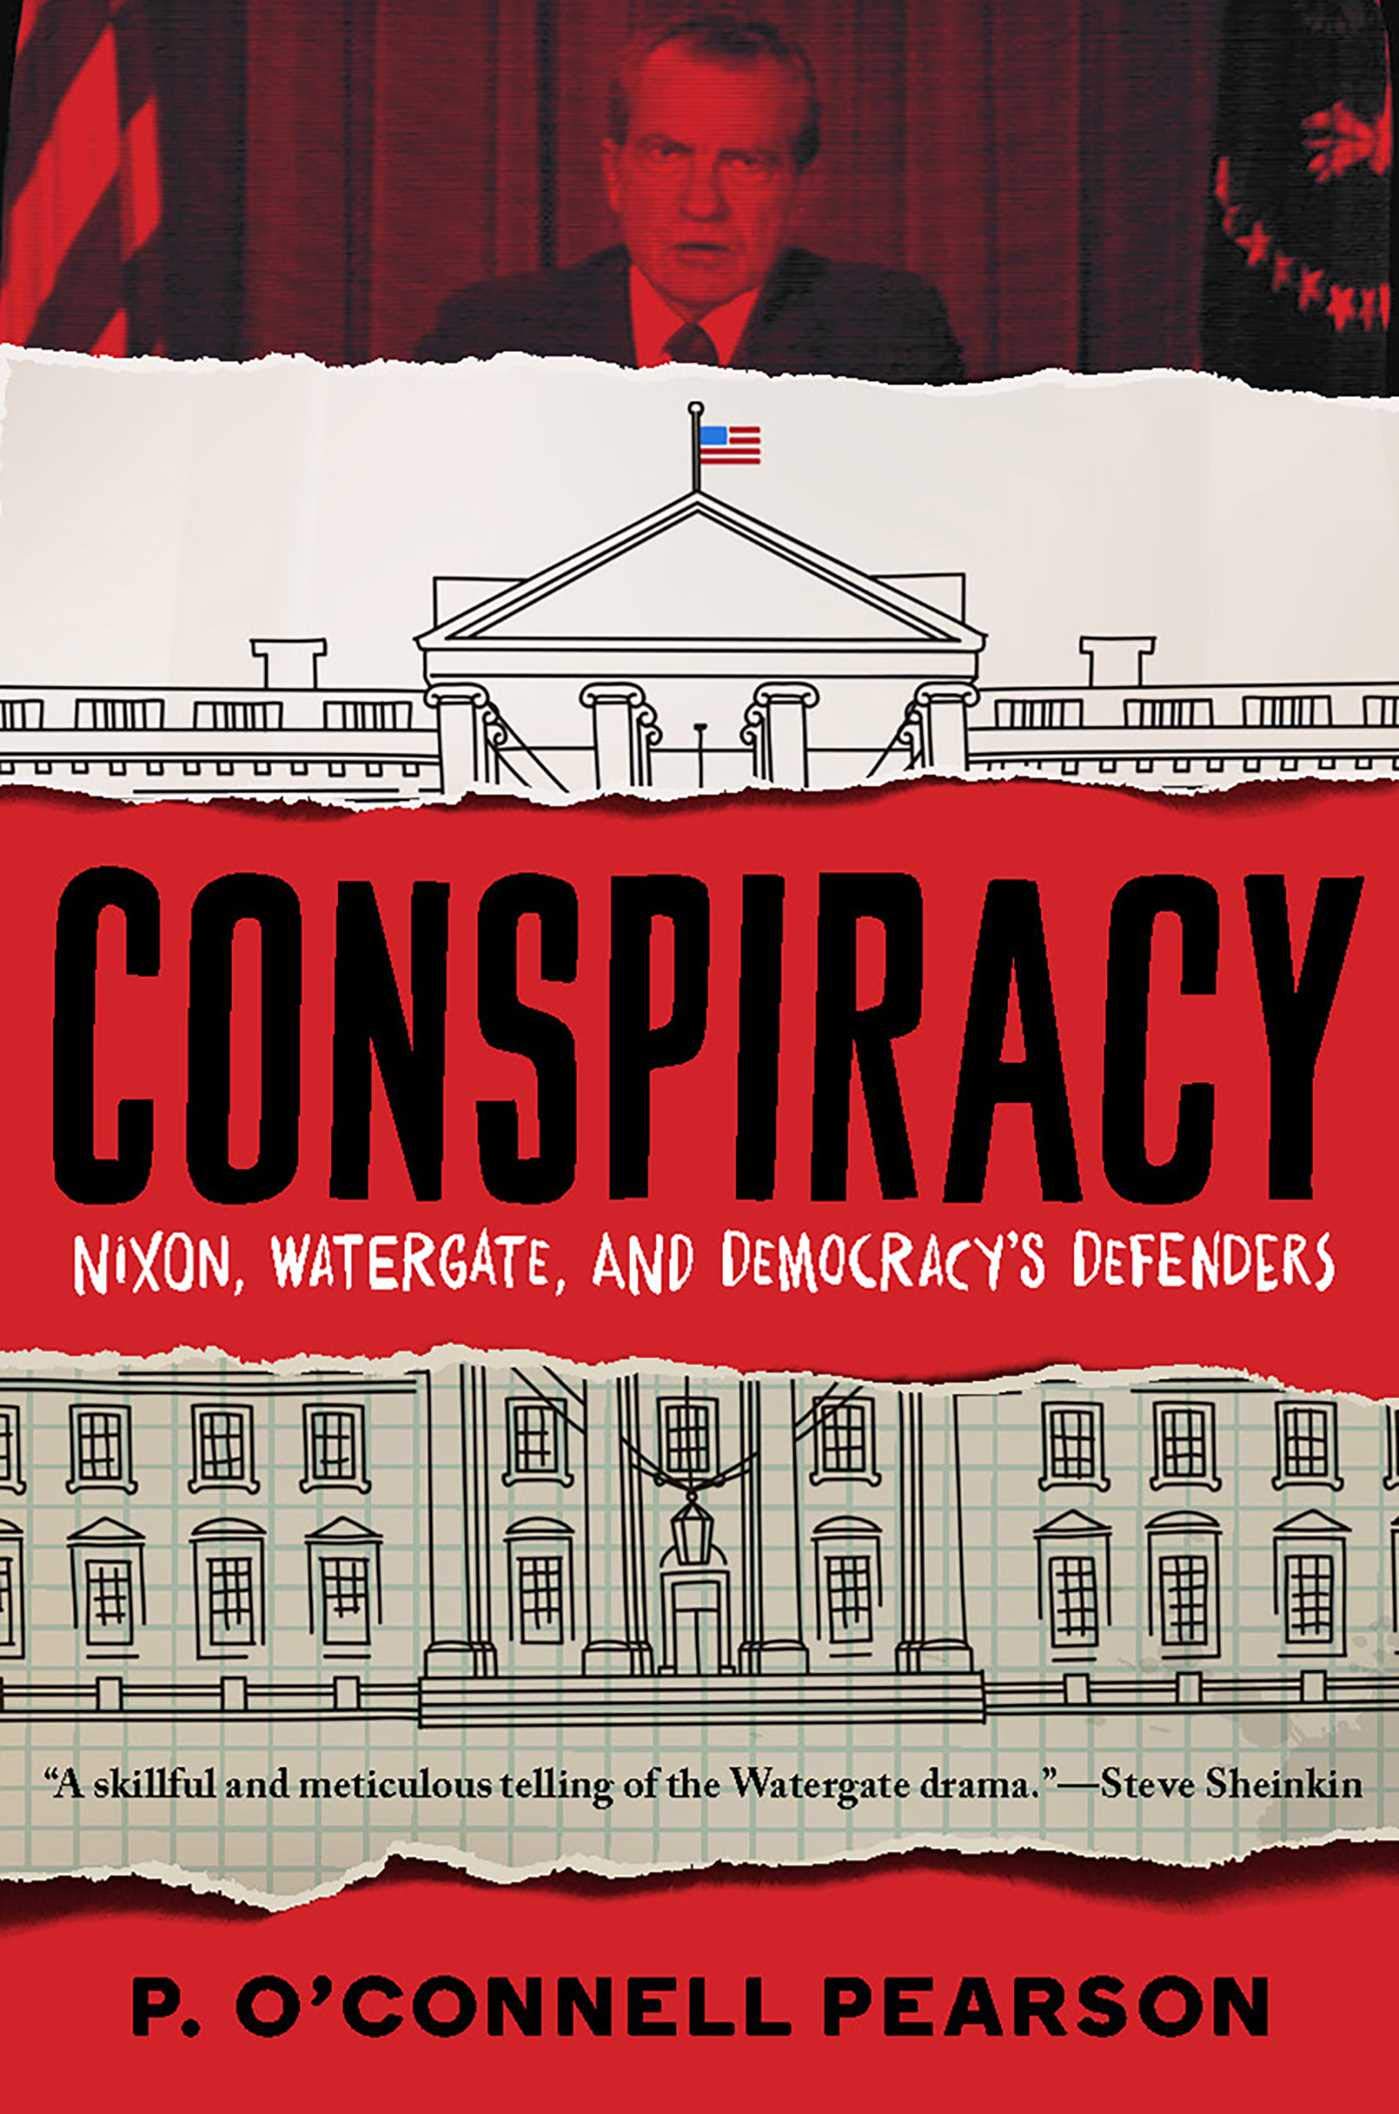 Conspiracy: Nixon, Watergate, and Democracy’s Defenders